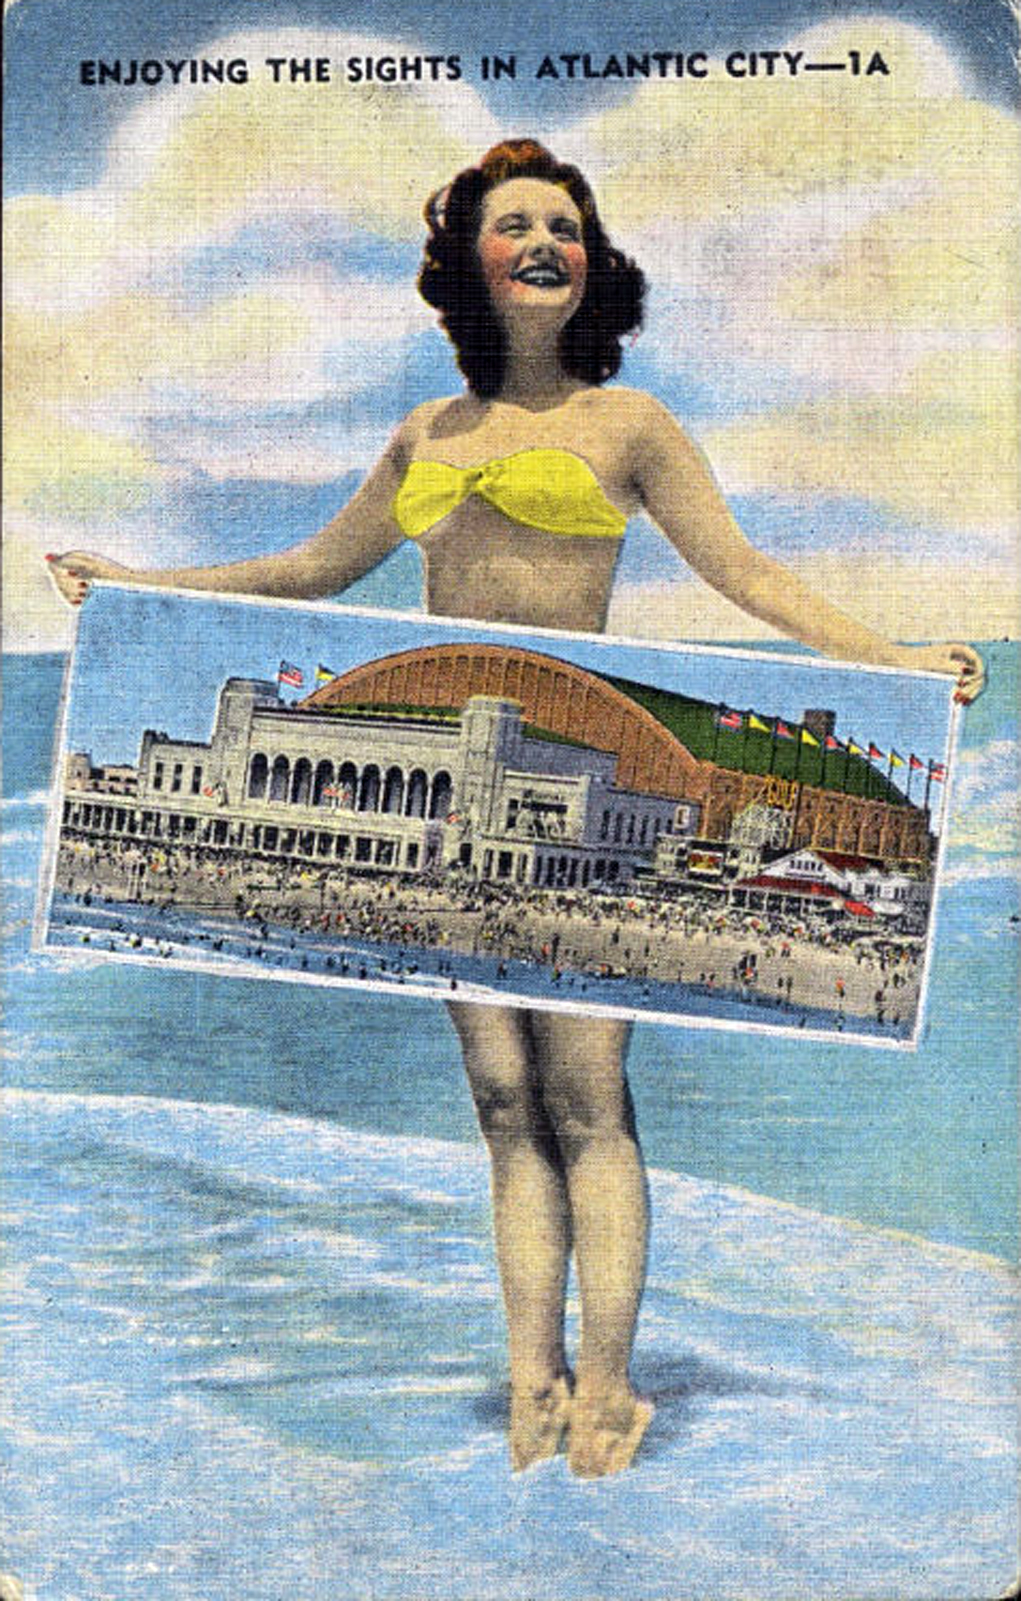 Atlantic City - Bathing Beauty with Convntion Center Picture - 1920s